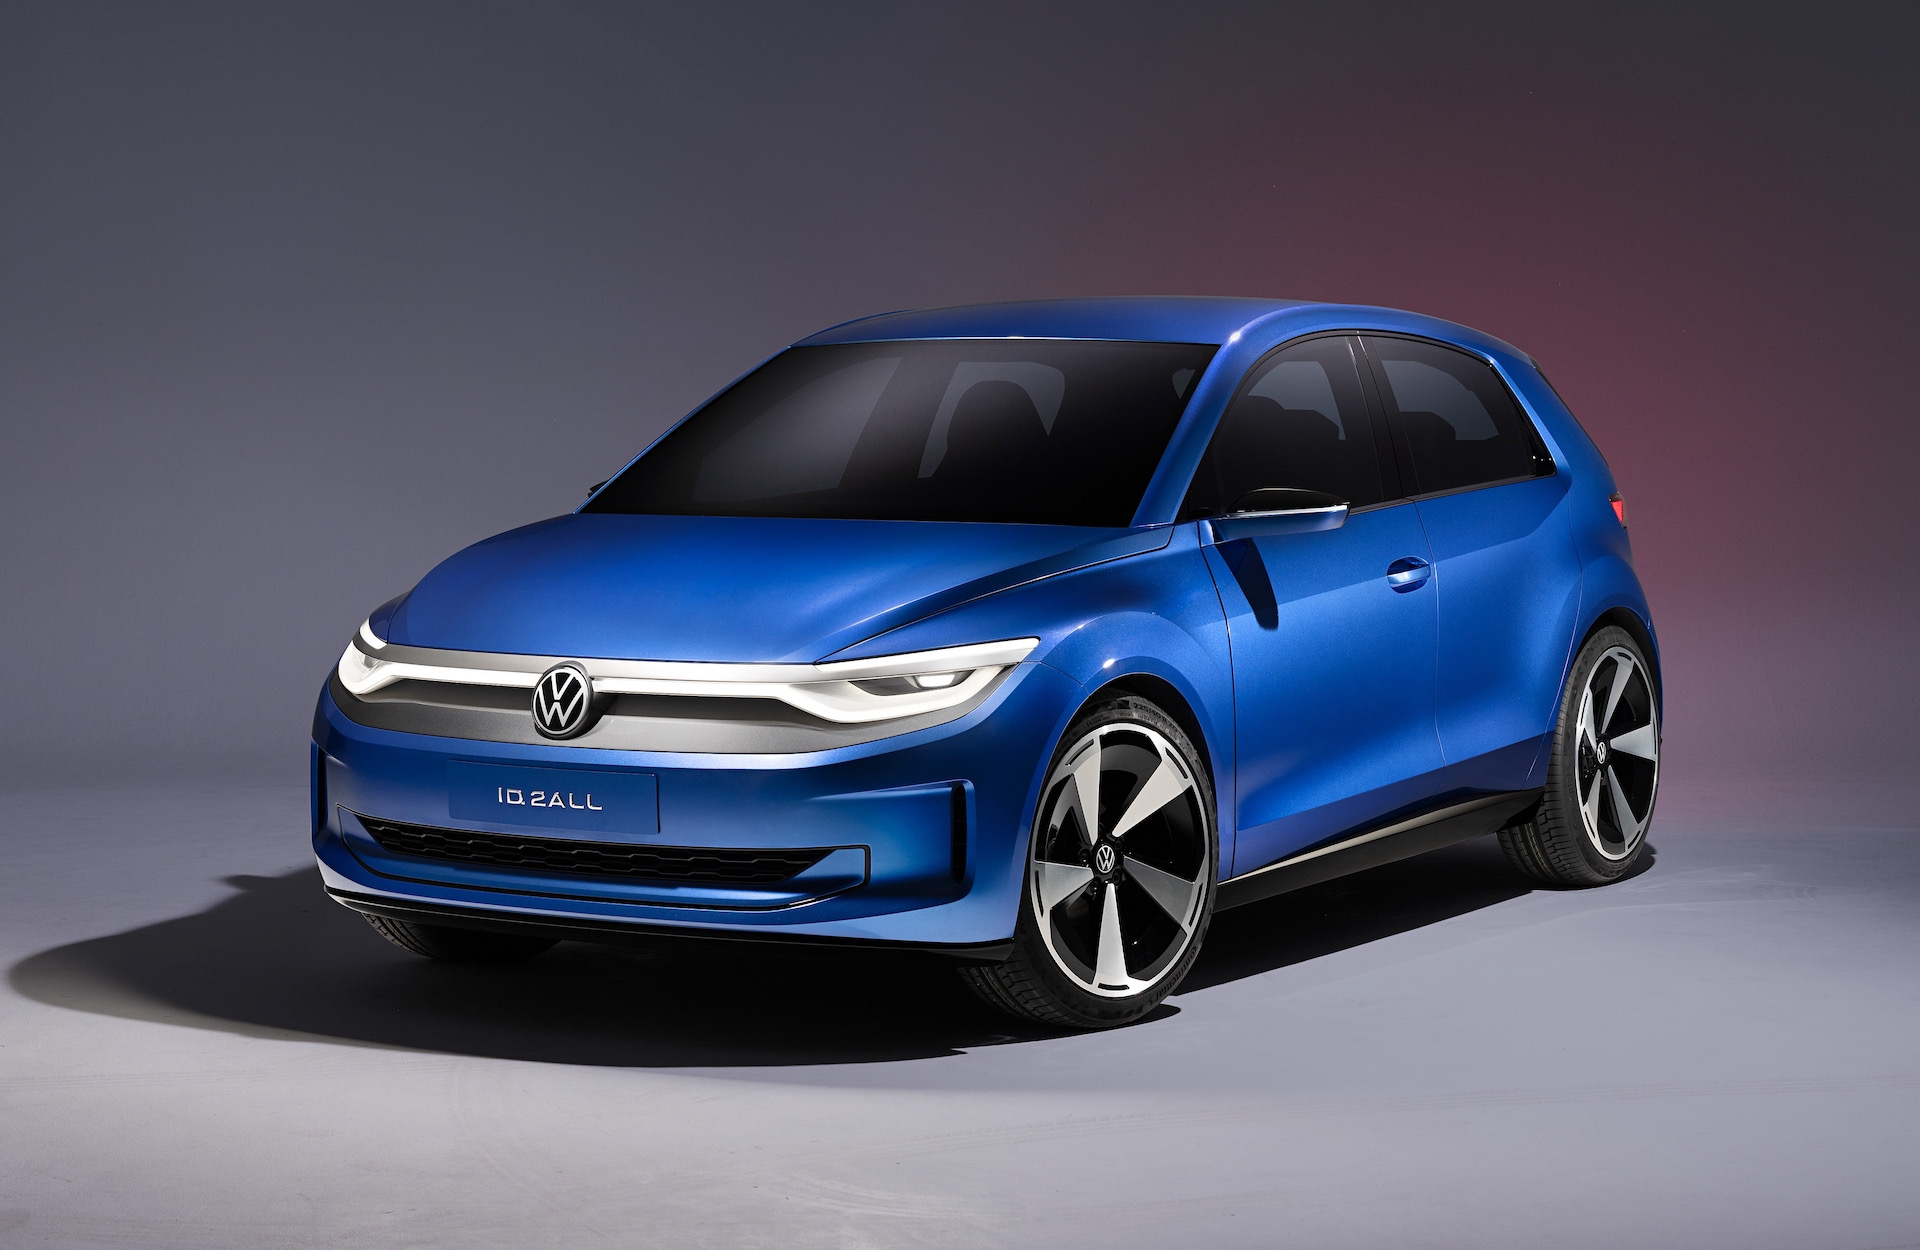 2025 Volkswagen ID.2all promises 450km range, GTI performance, affordable price